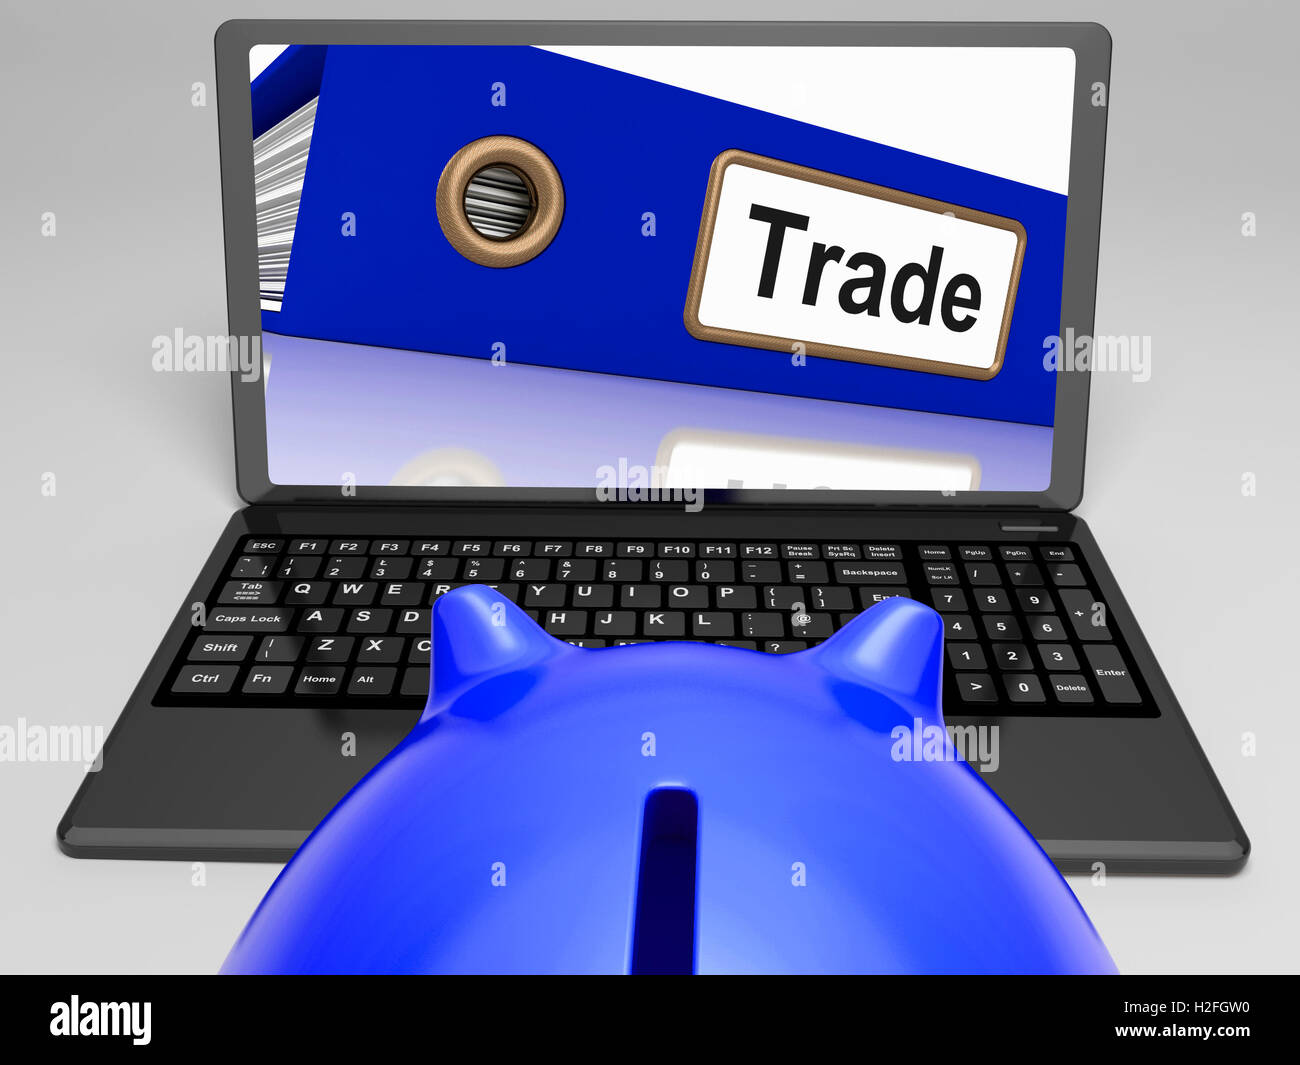 Trade Laptop Shows Internet Trading And Transactions Stock Photo